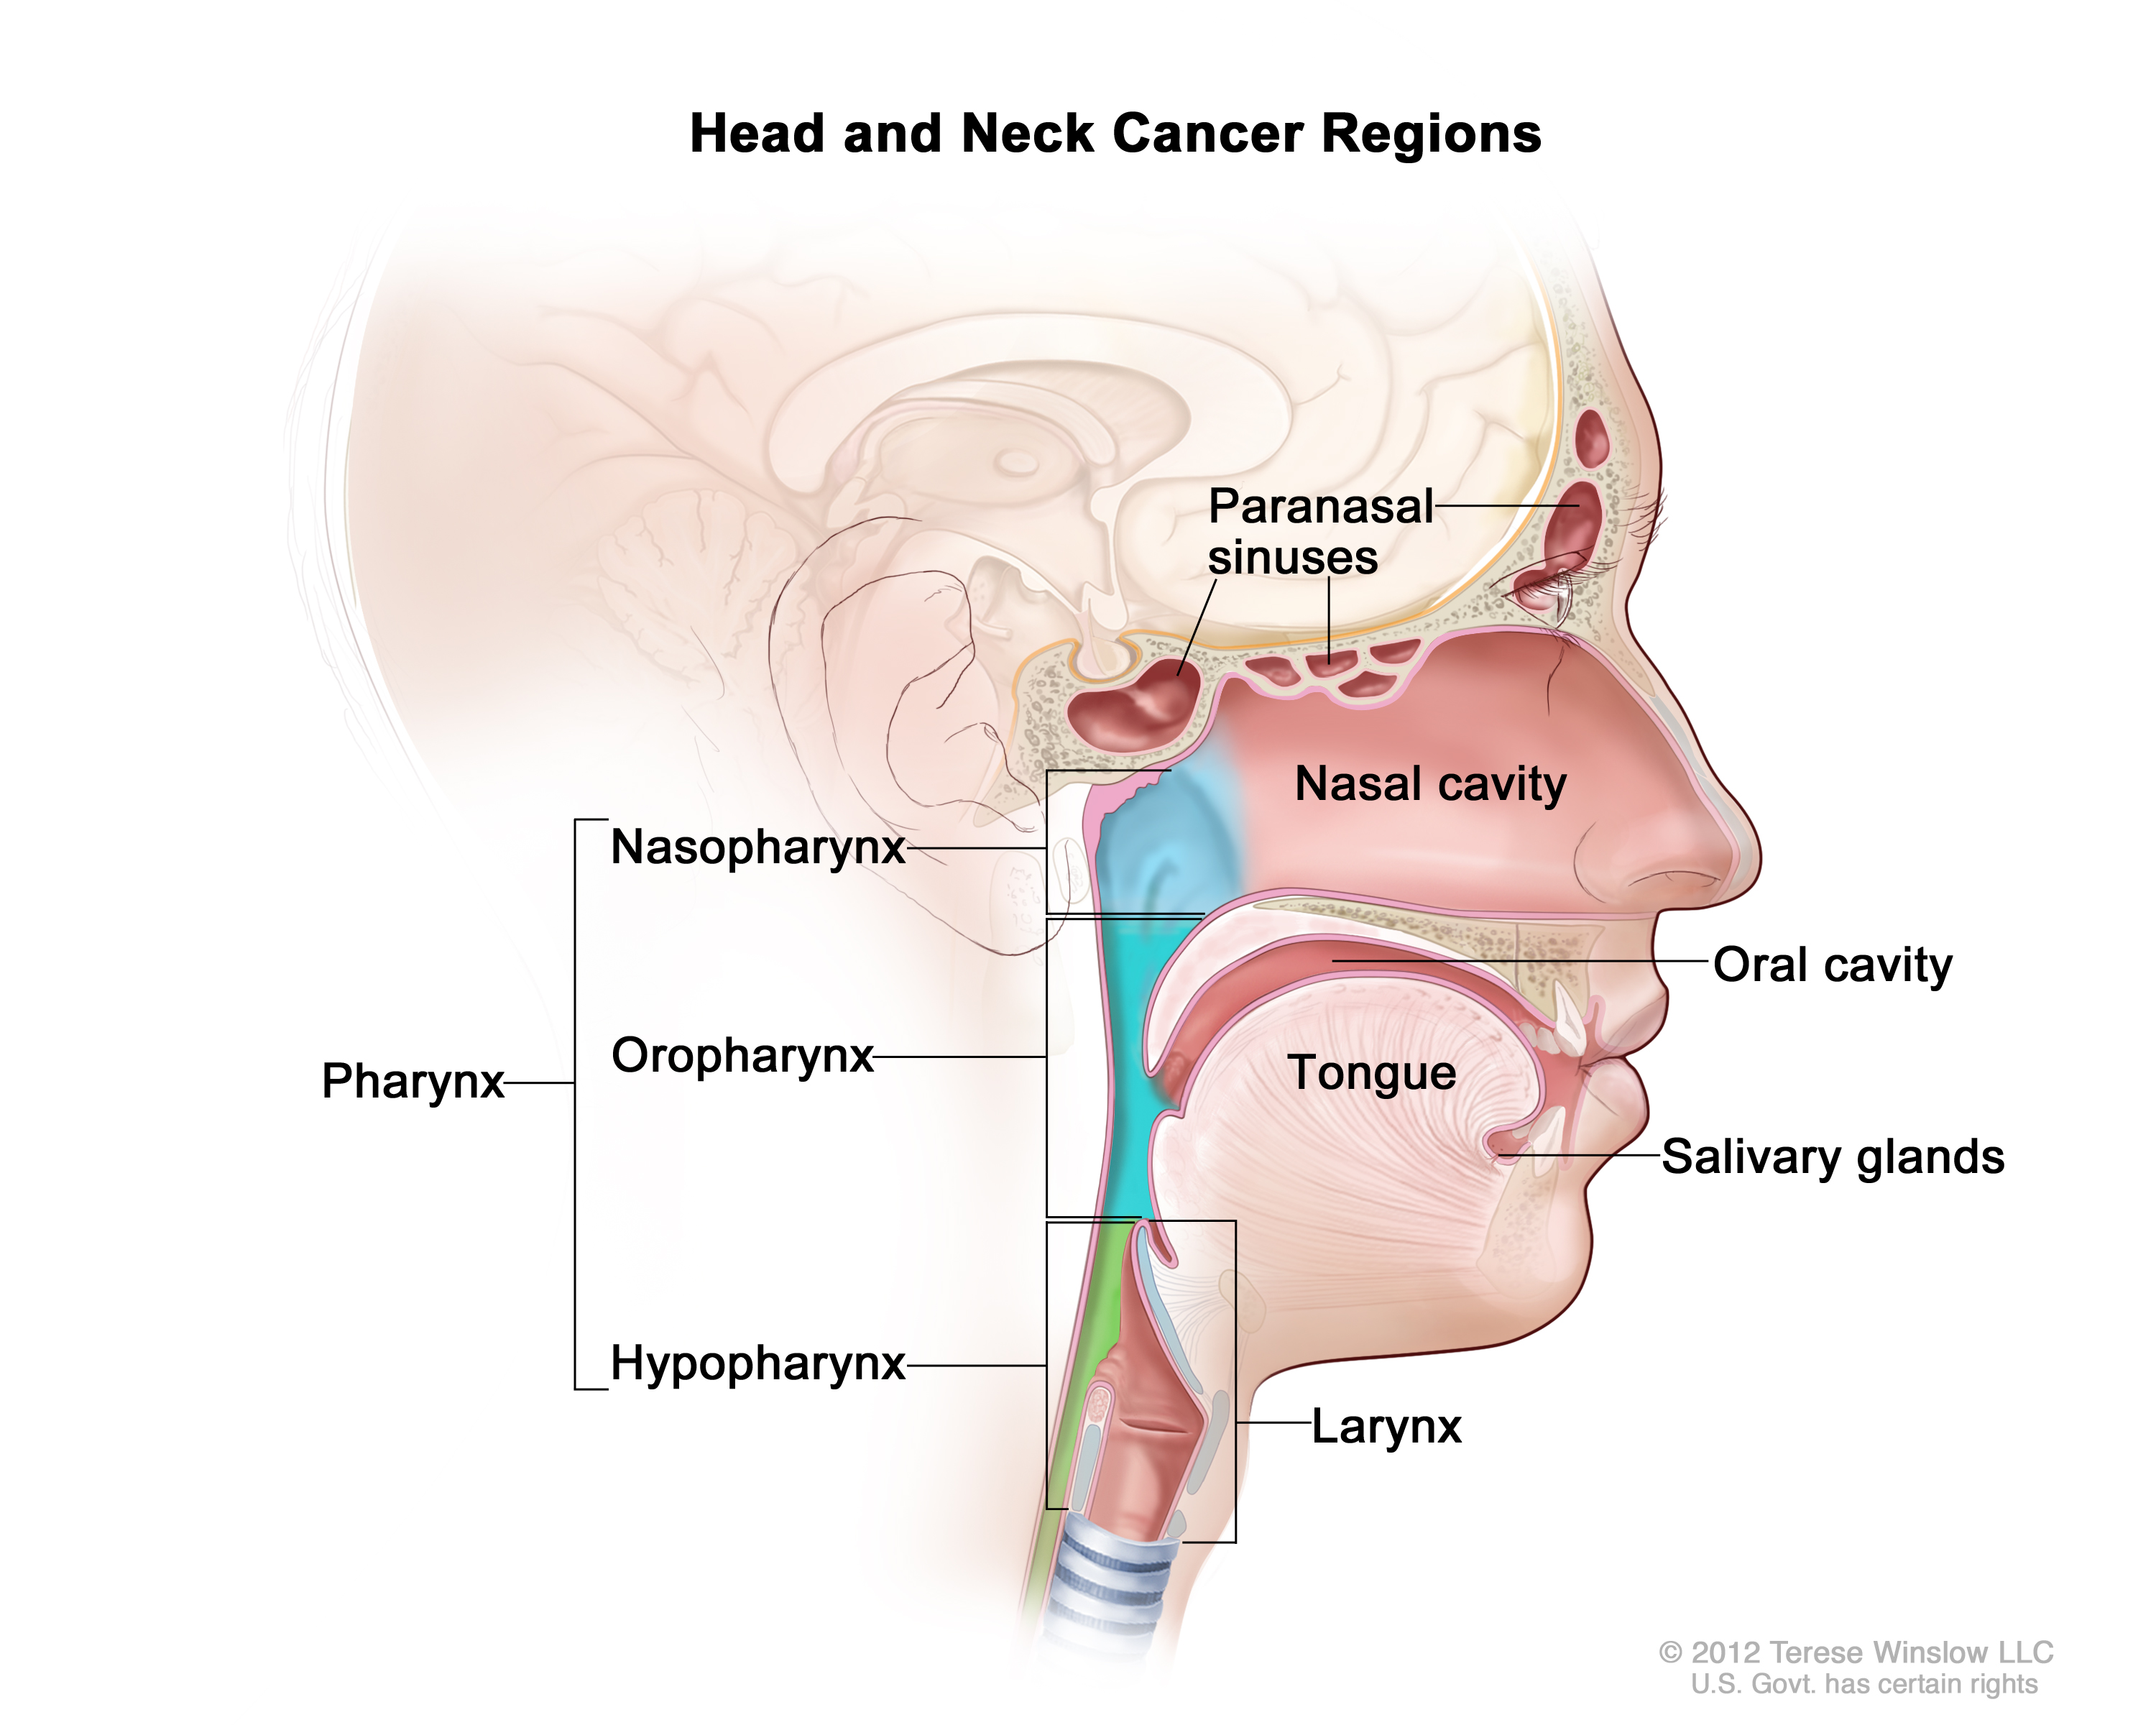 Illustration of head and neck cancer regions